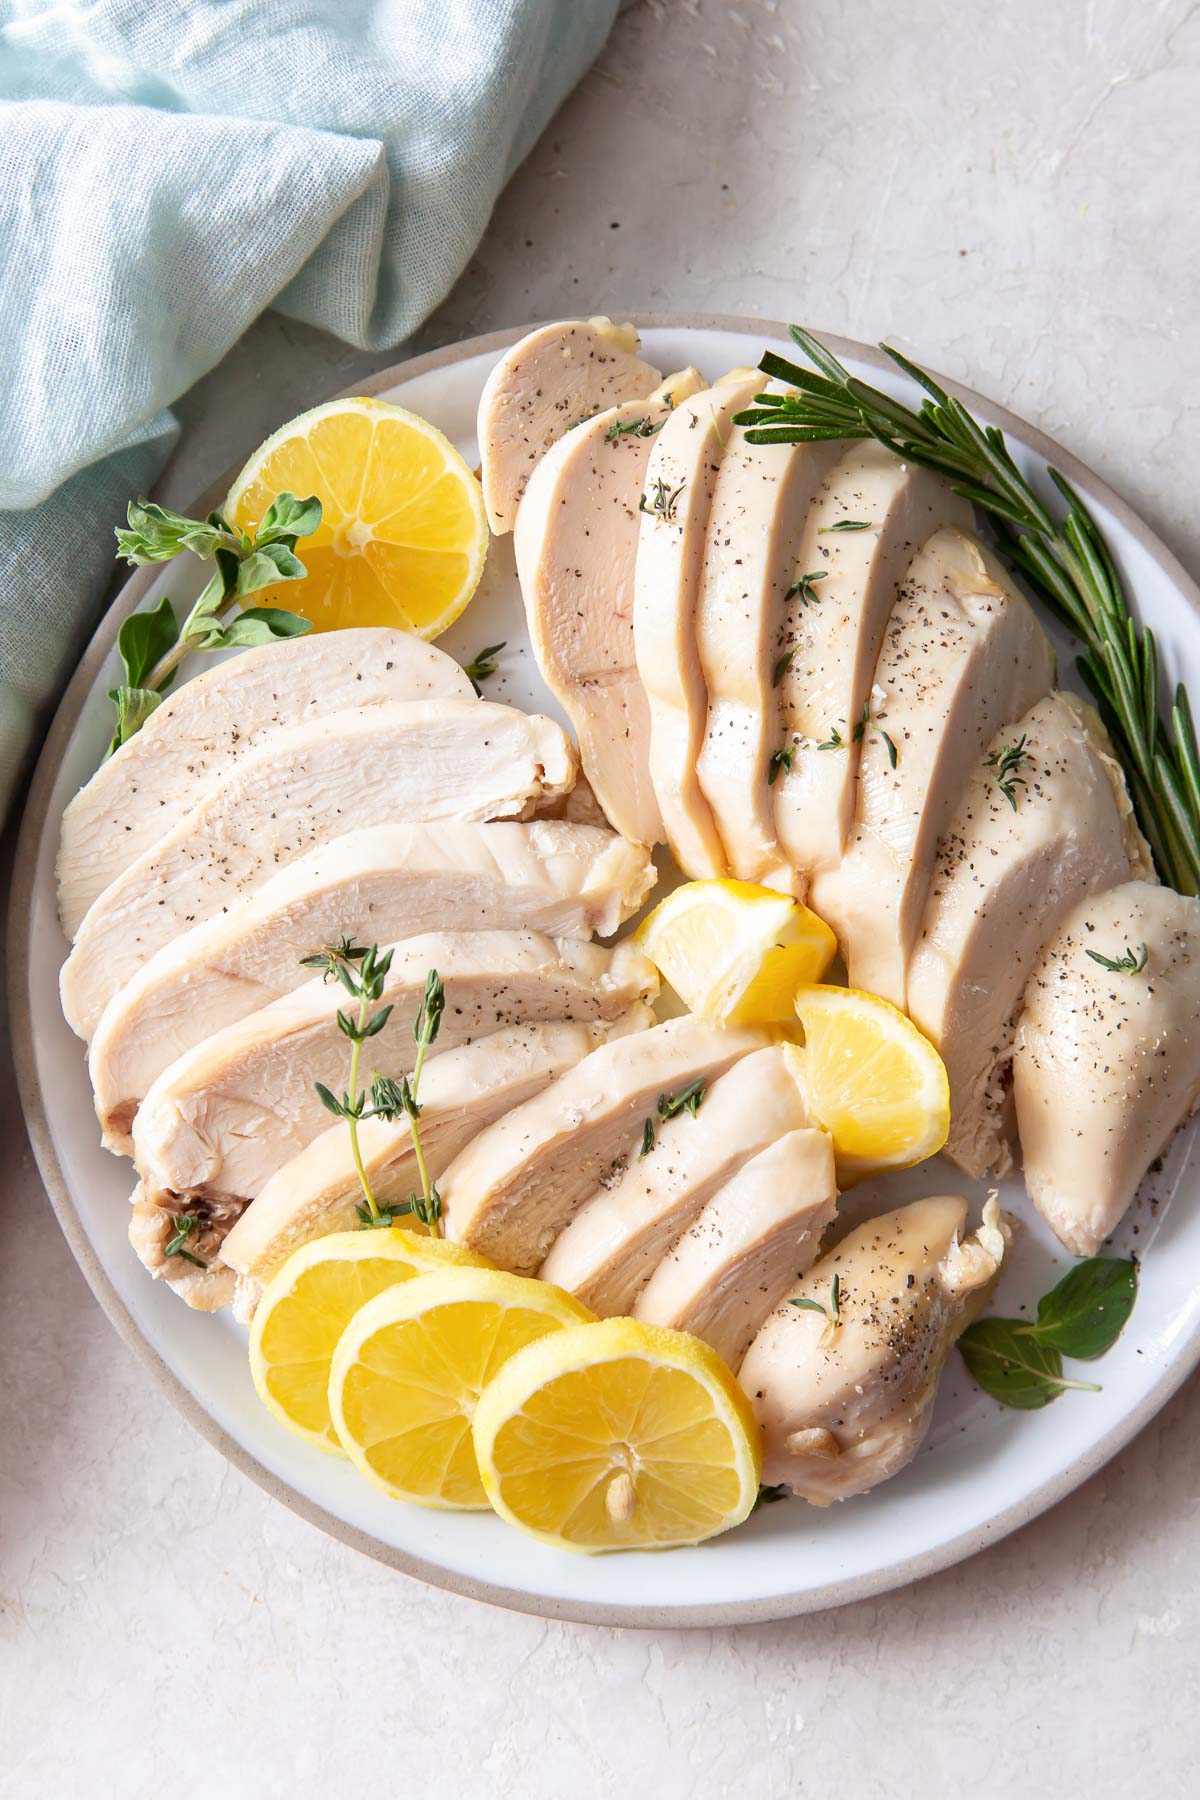 Sliced poached chicken on a plate with lemon and herbs.